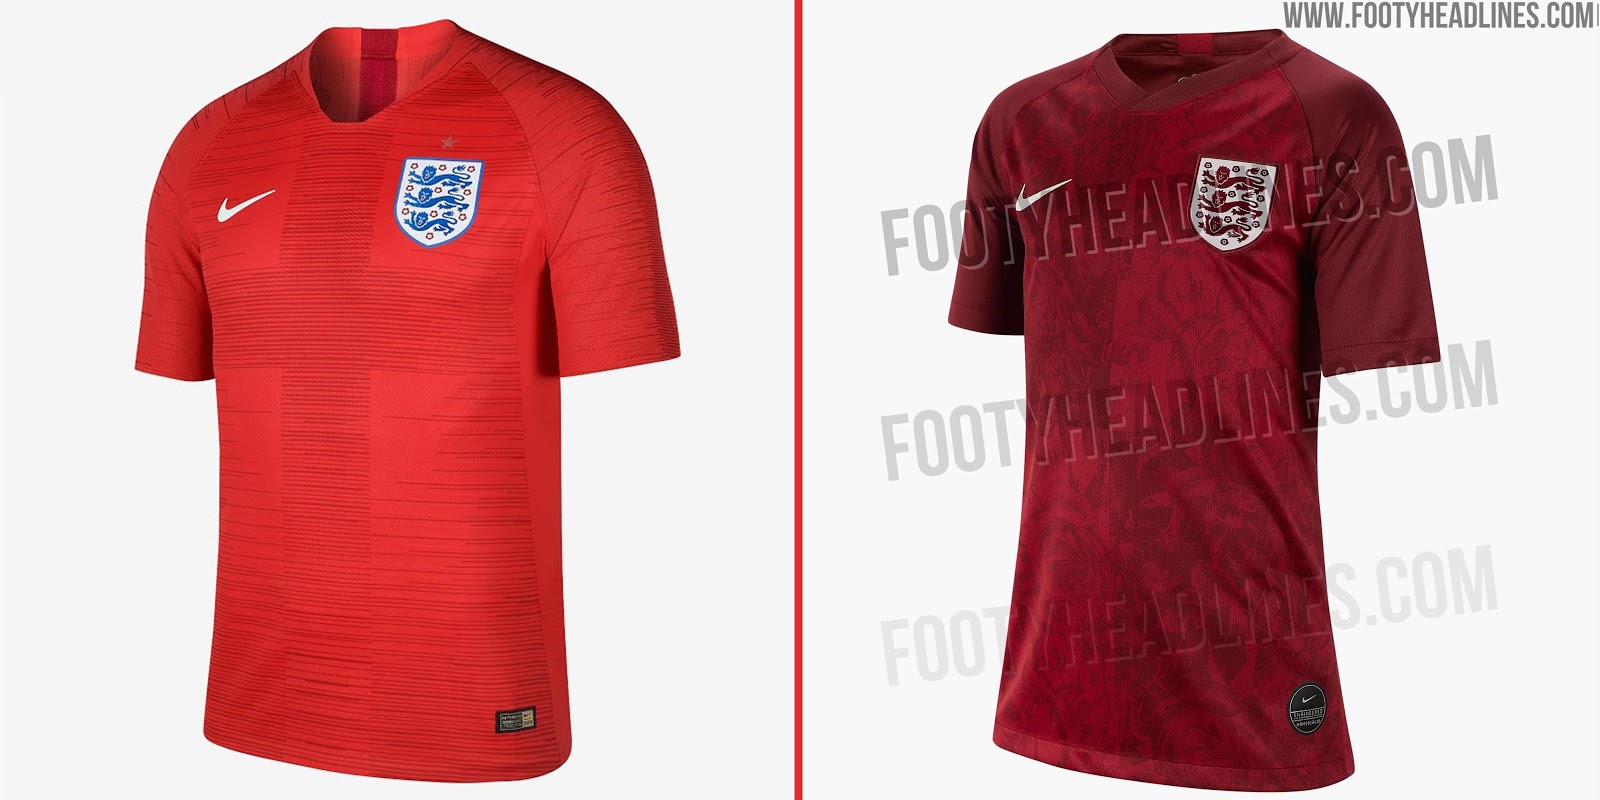 Which Are Better? Nike England 2018 Men's vs 2019 Women's World Cup